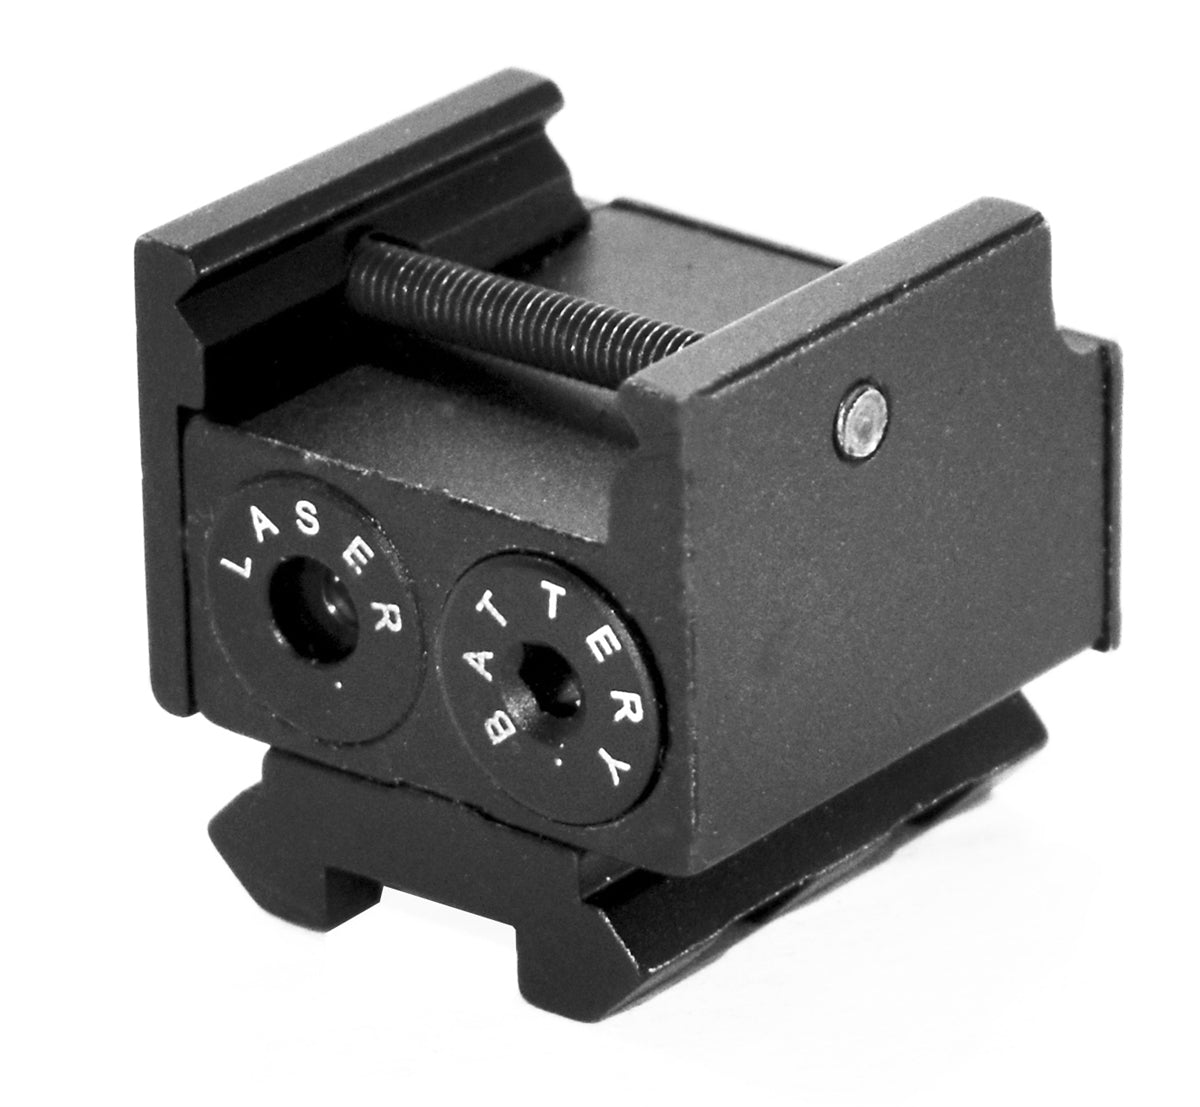 Trinity Compact Red Pistol Laser Sight For Sig Sauer P320 picatinny weaver mount.